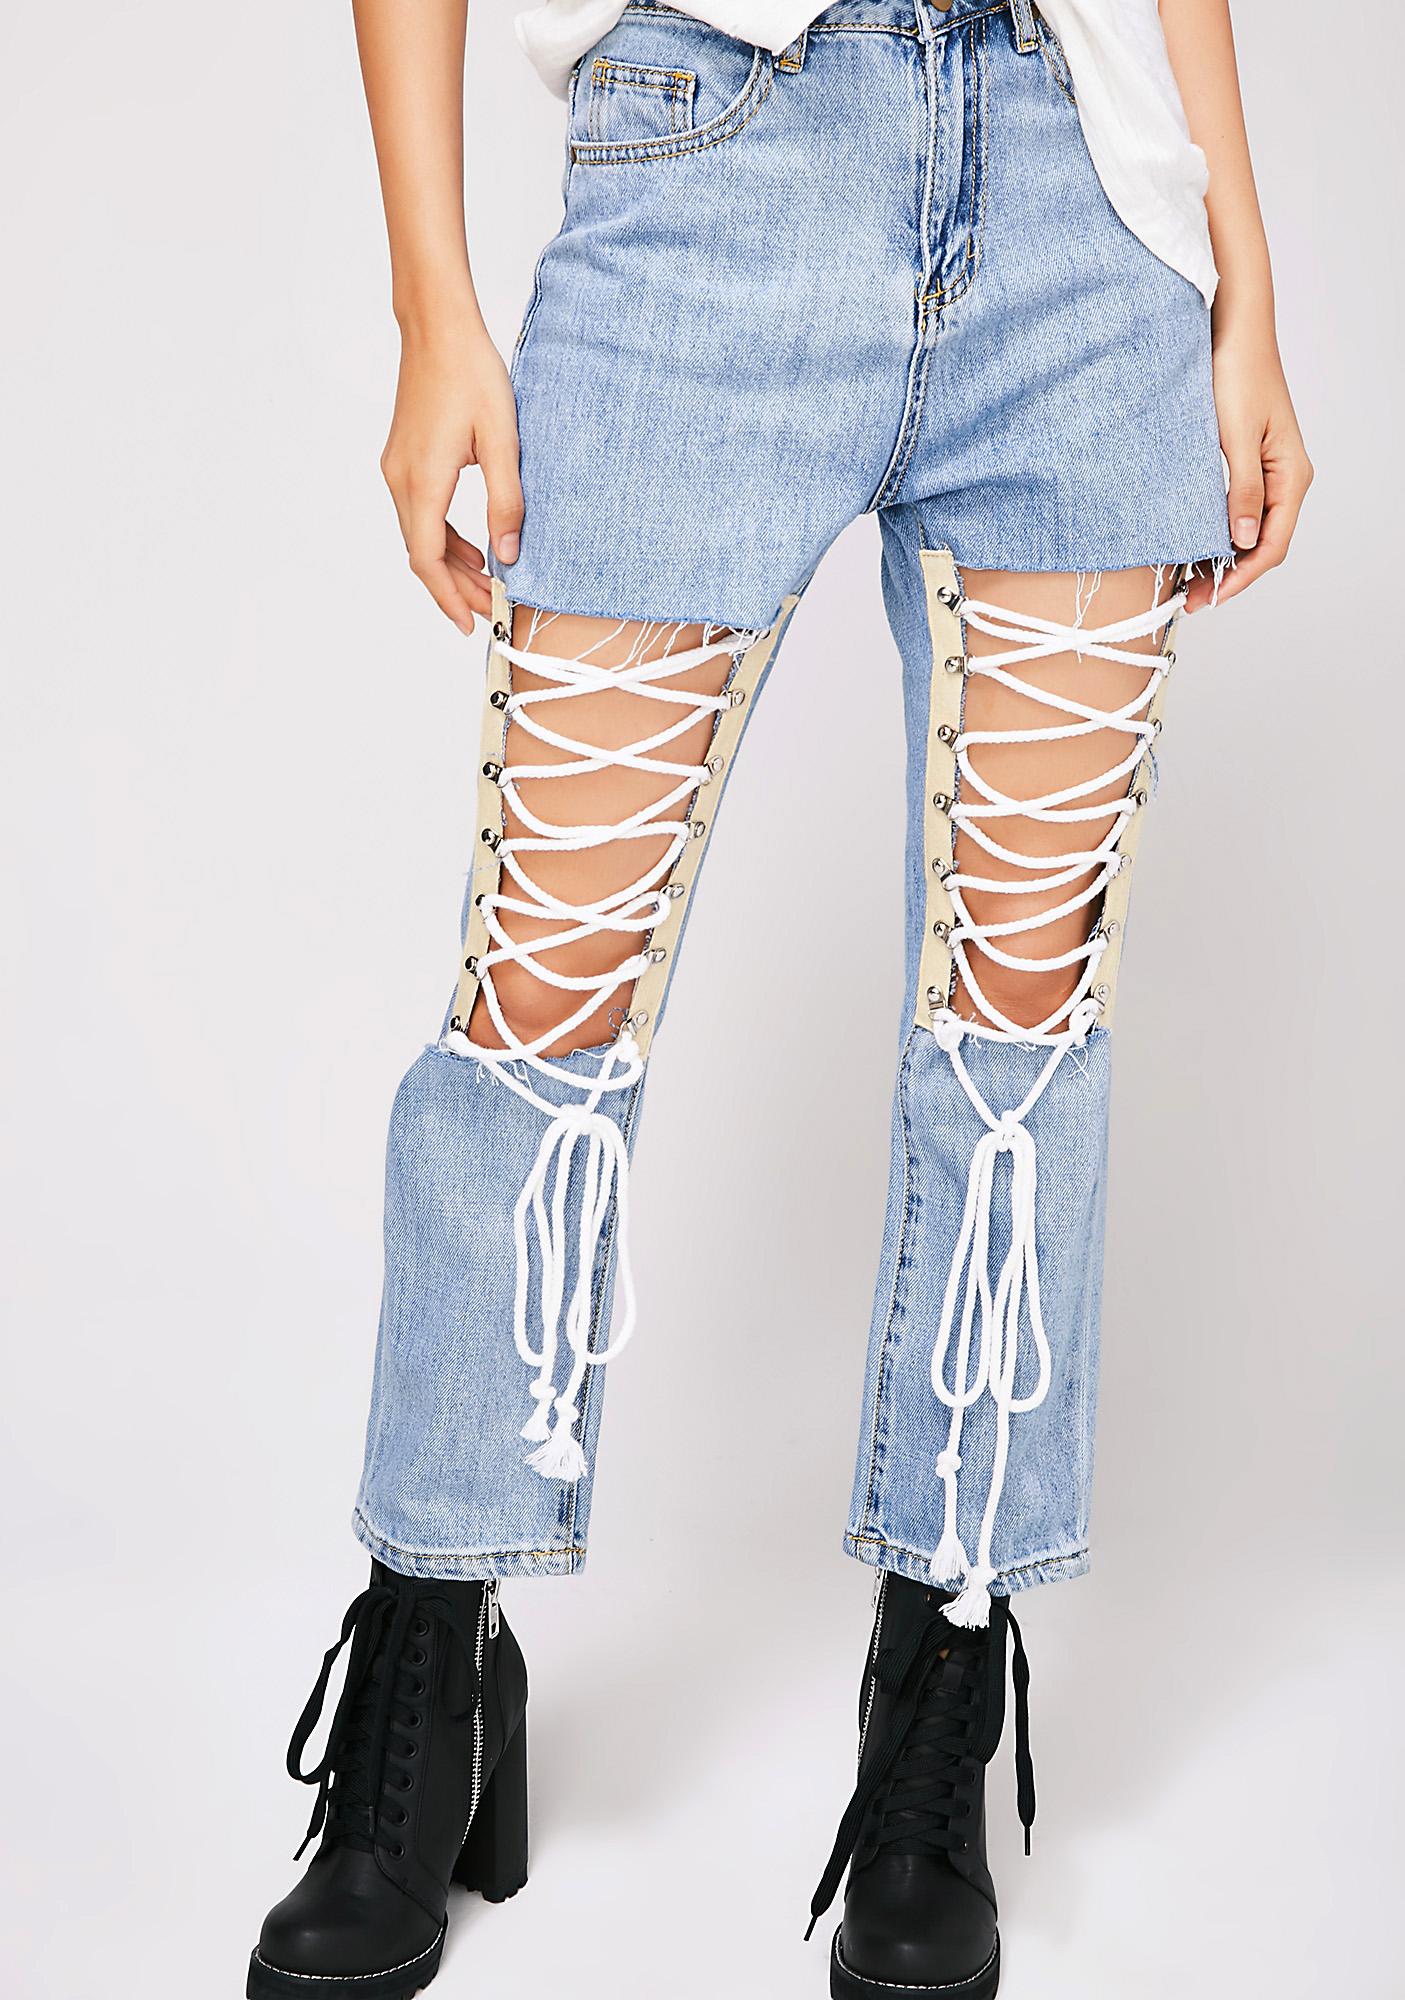 cut up jeans front and back